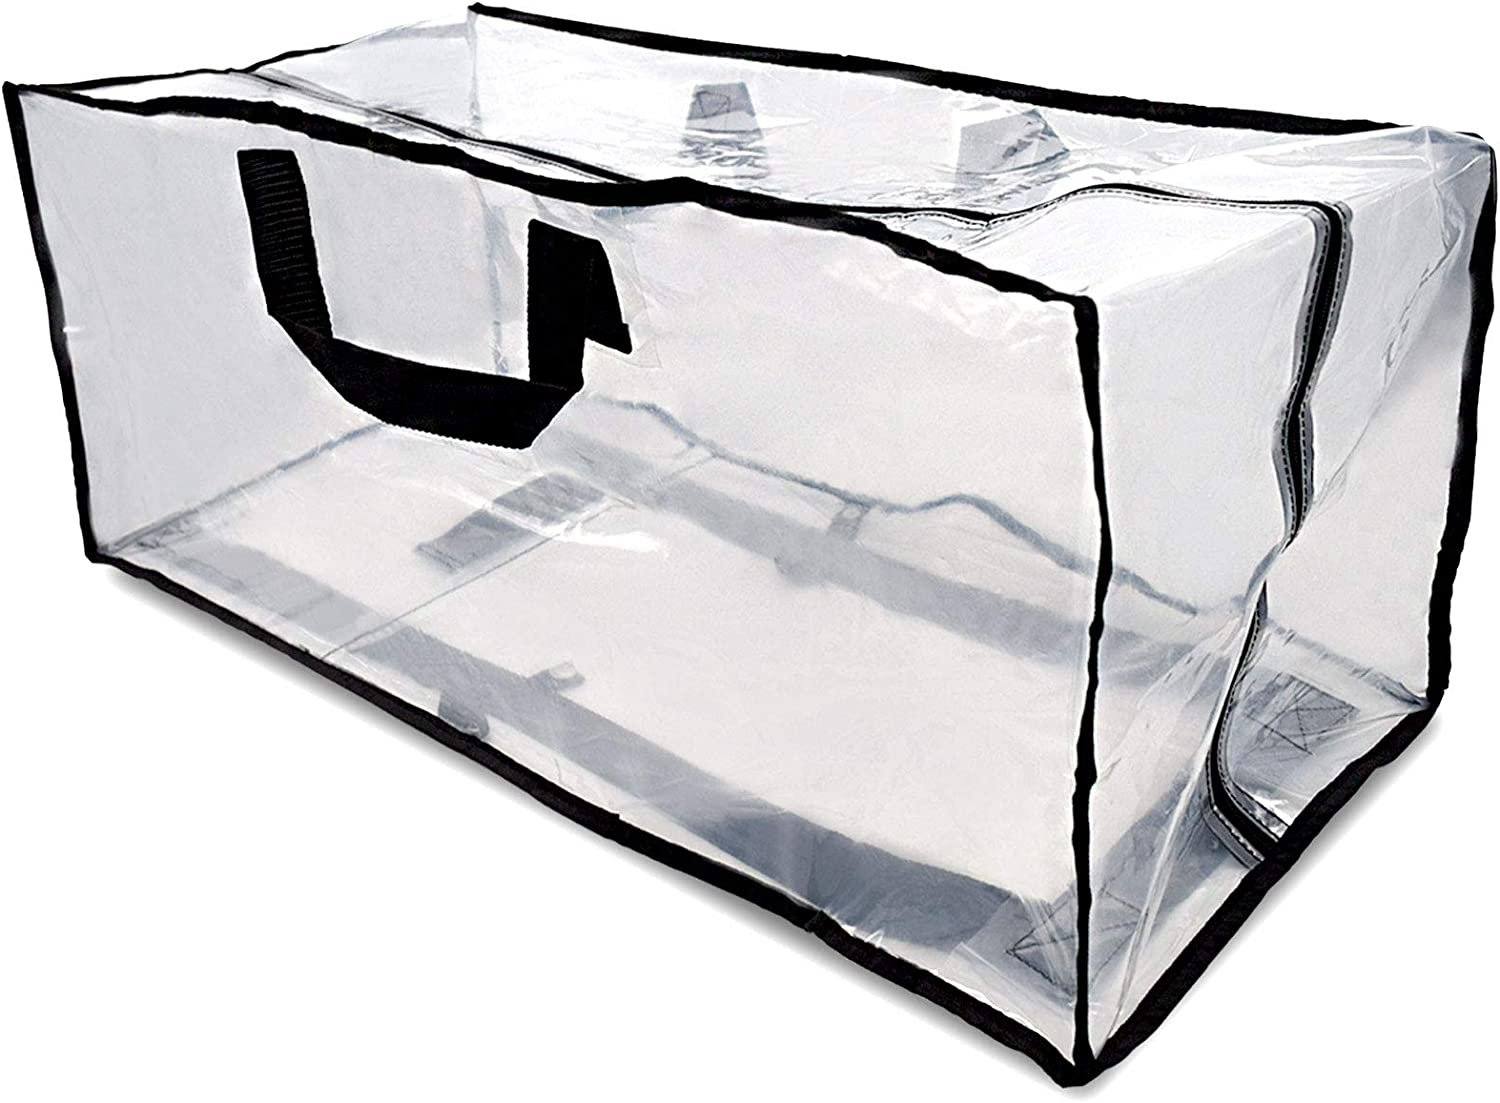 Packing Bags for Moving – 6 Pack Clear Zippered Storage Bags with